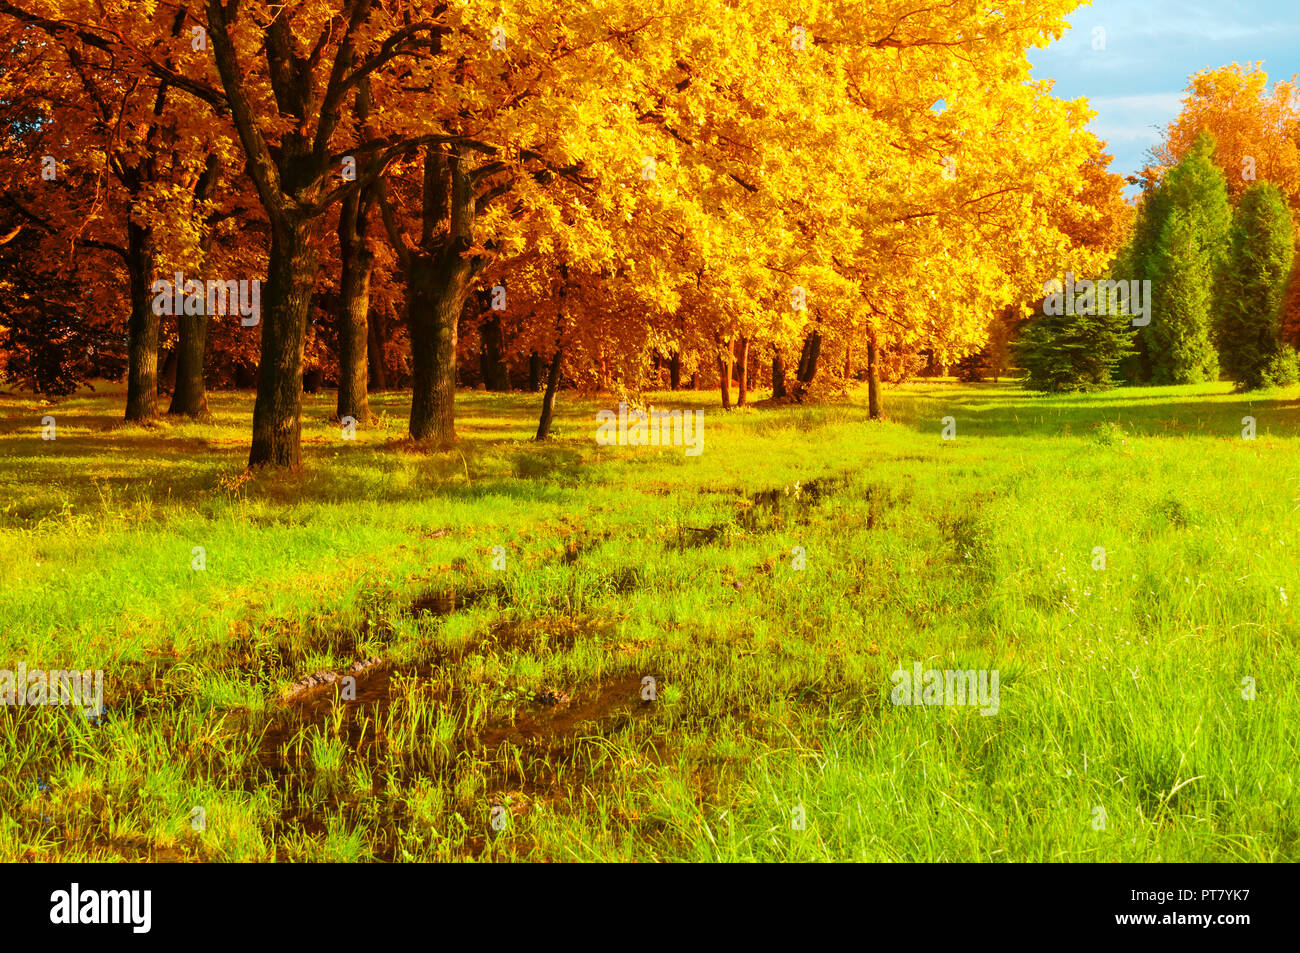 Autumn landscape. Golden park trees and flooded lawn in the autumn park in  sunny weather. Colorful autumn nature scene Stock Photo - Alamy